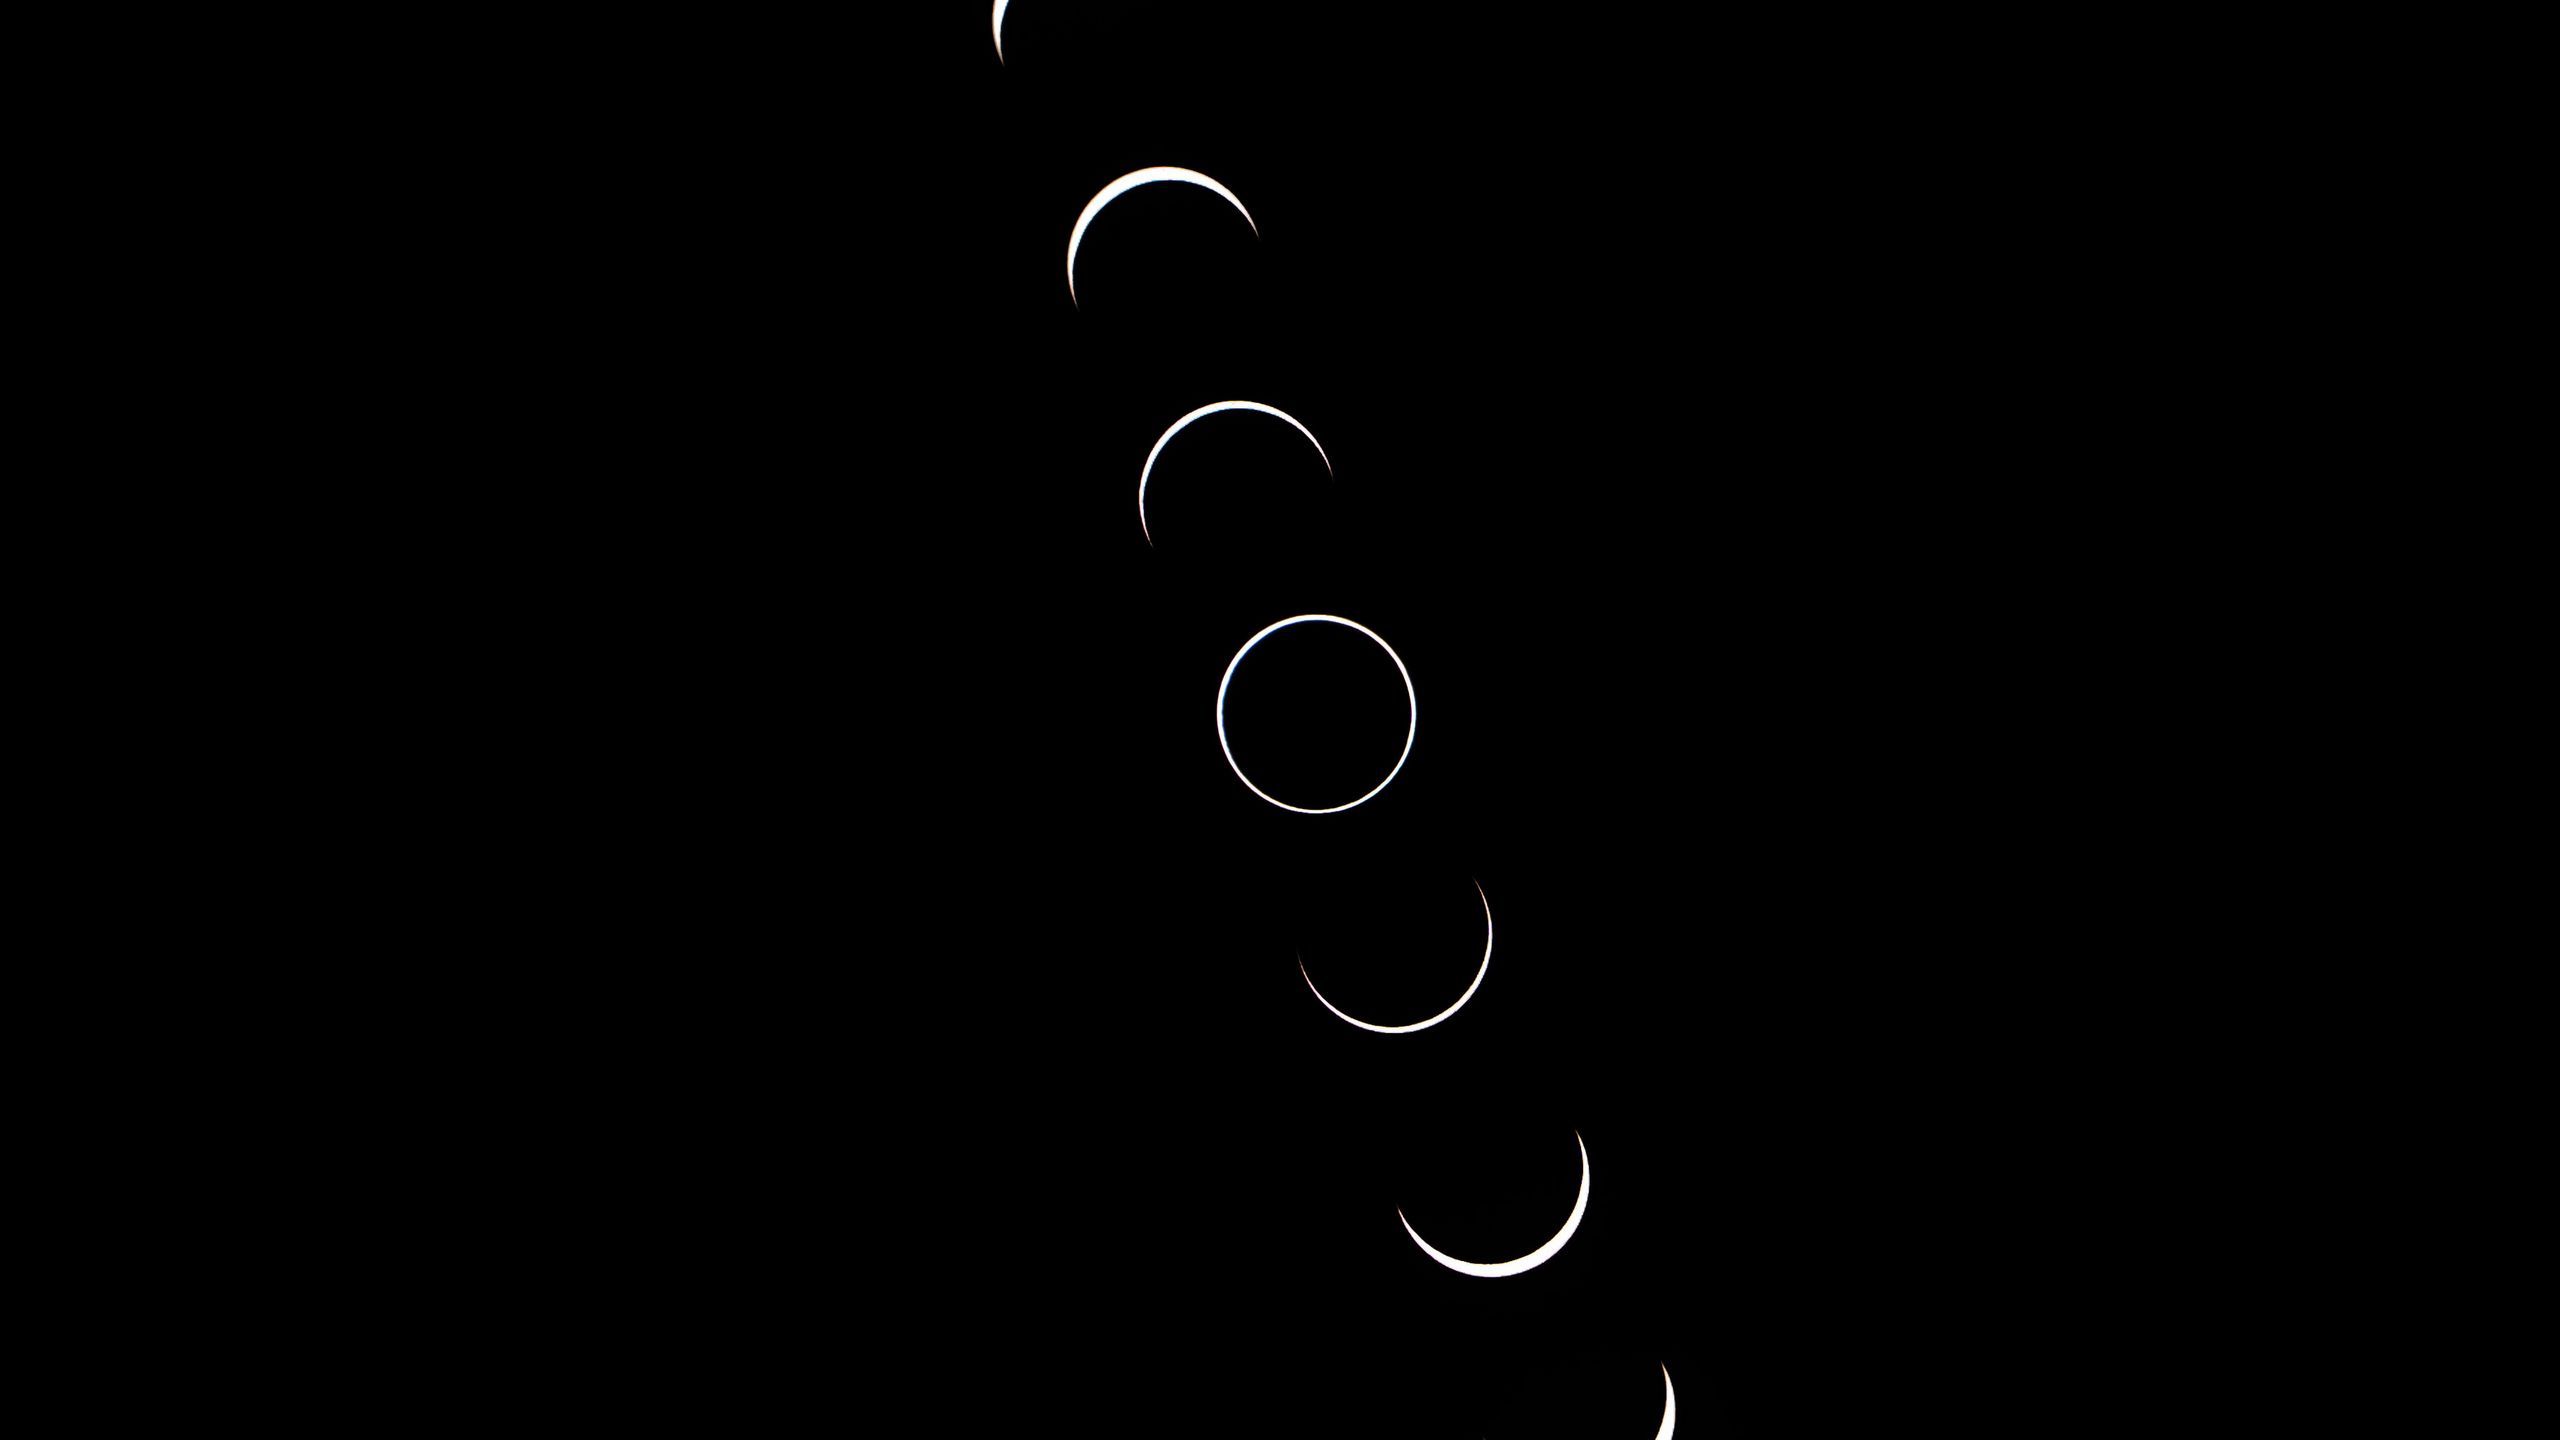 Download wallpaper 2560x1440 moon, phases, black widescreen 16:9 HD background